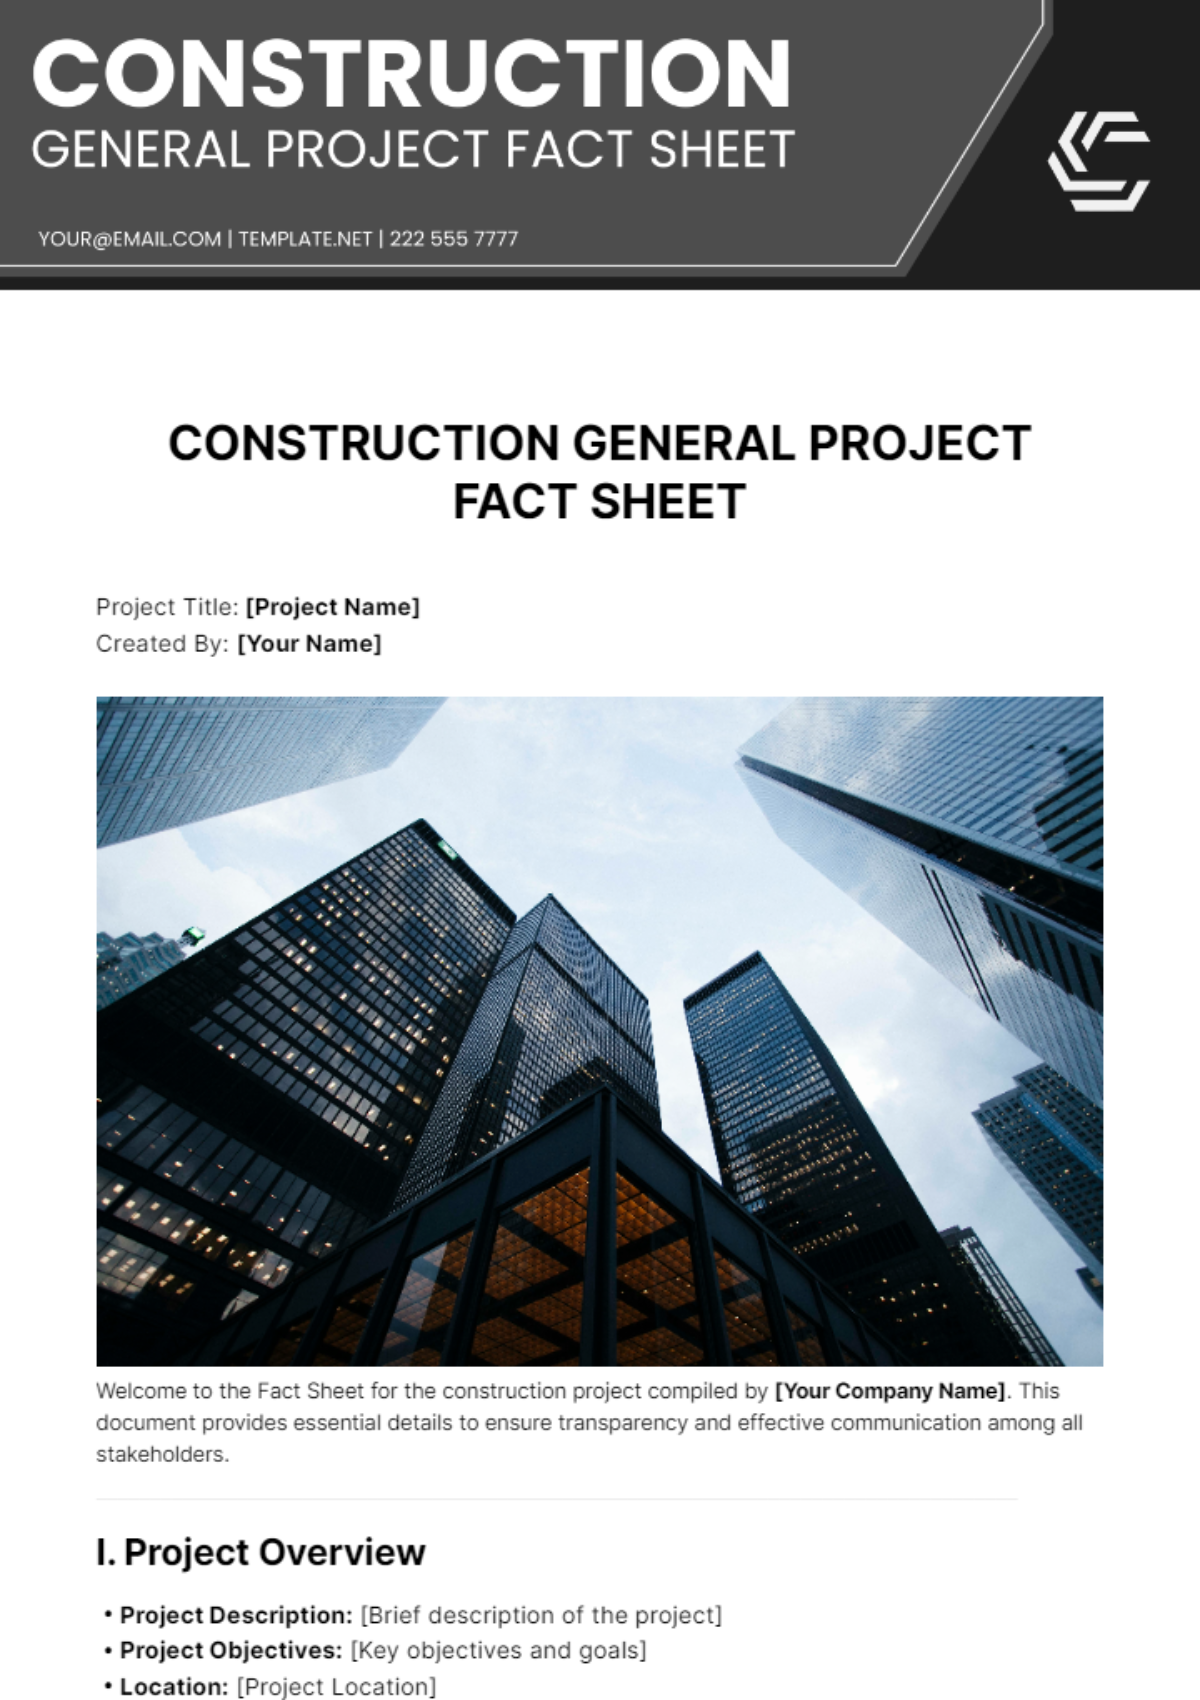 Construction General Project Fact Sheet Template